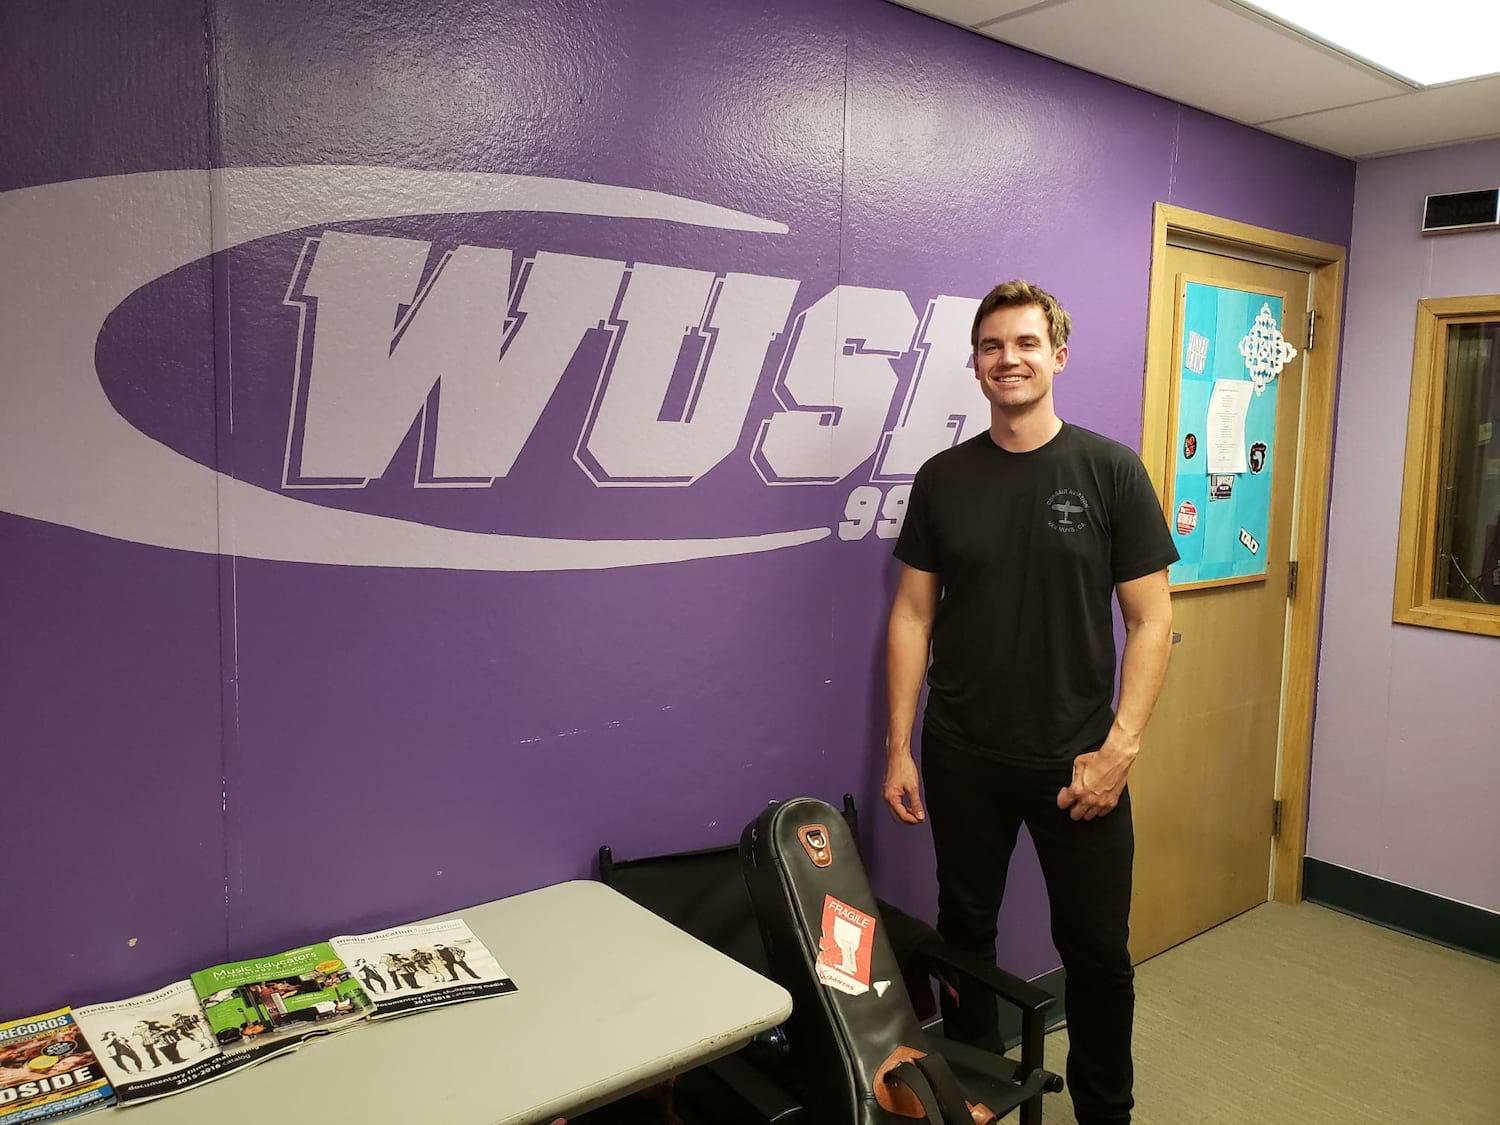 <b>Tyler Hilton</b><br /> Tyler Hilton visiting WUSR for a live in-studio performance and interview before he opens for Springfest 2019.